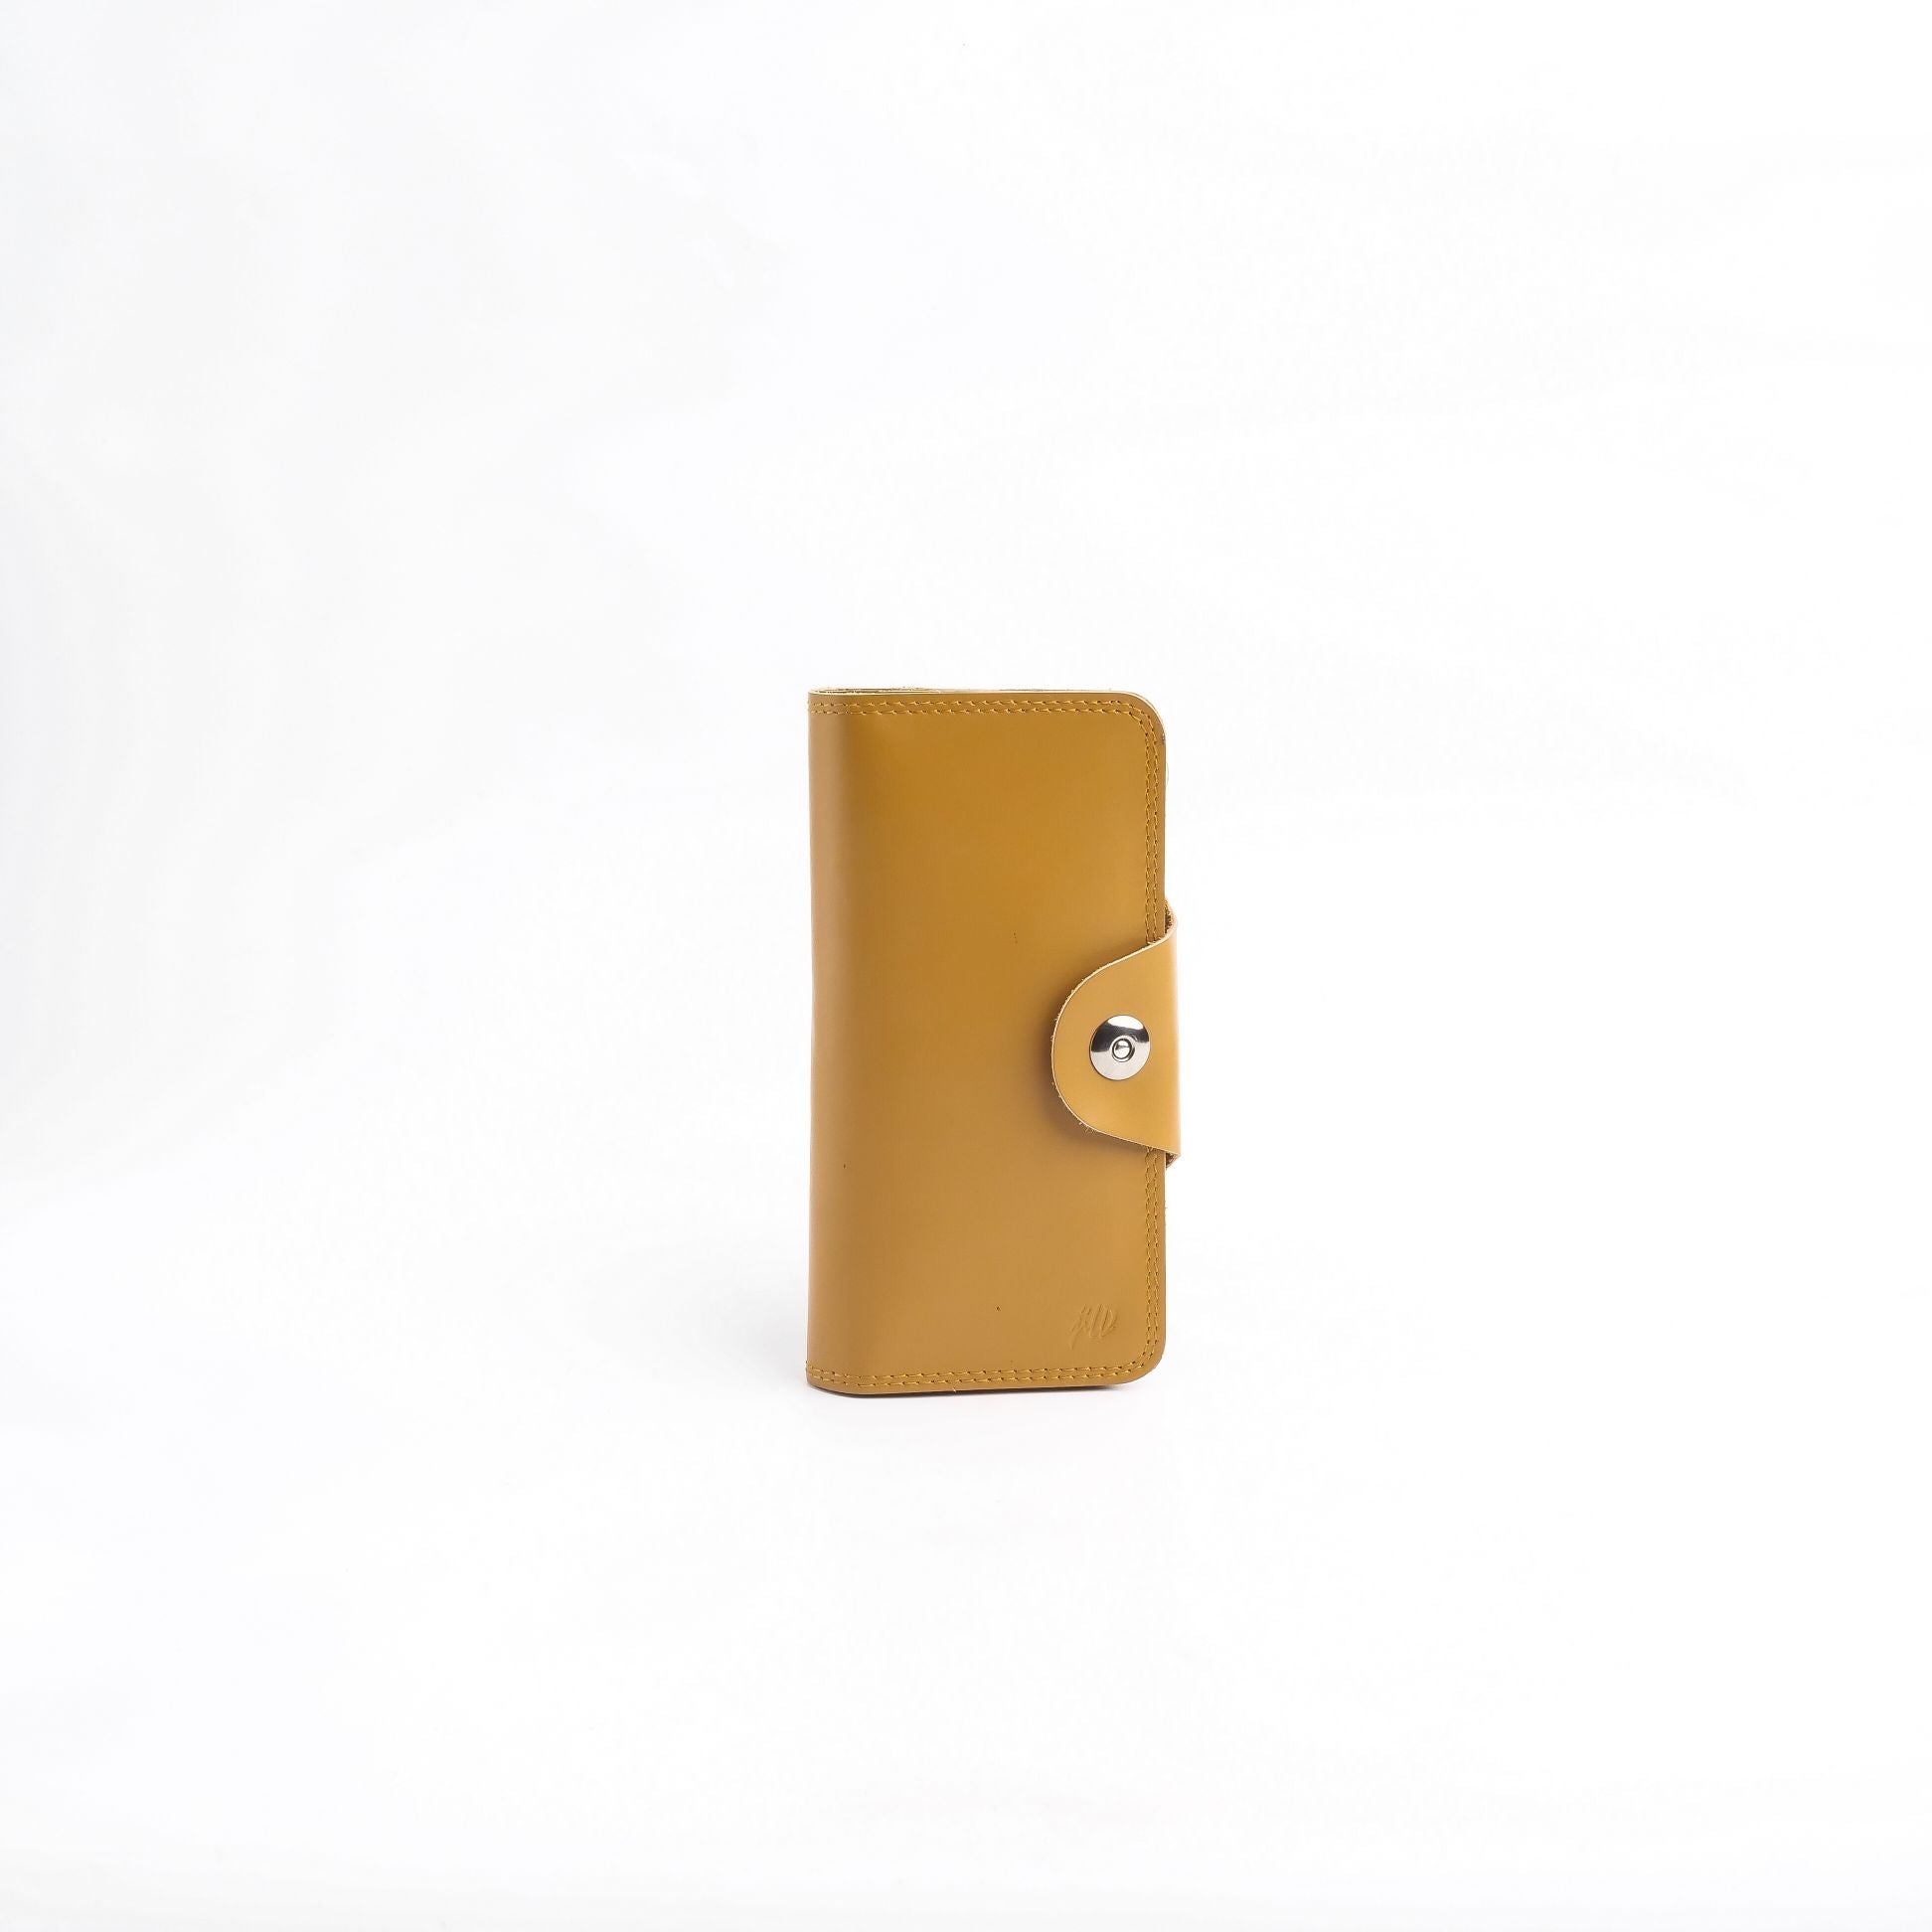 Tri-Fold Pure Leather Long Wallet With Button Closure-CAMEL BROWN